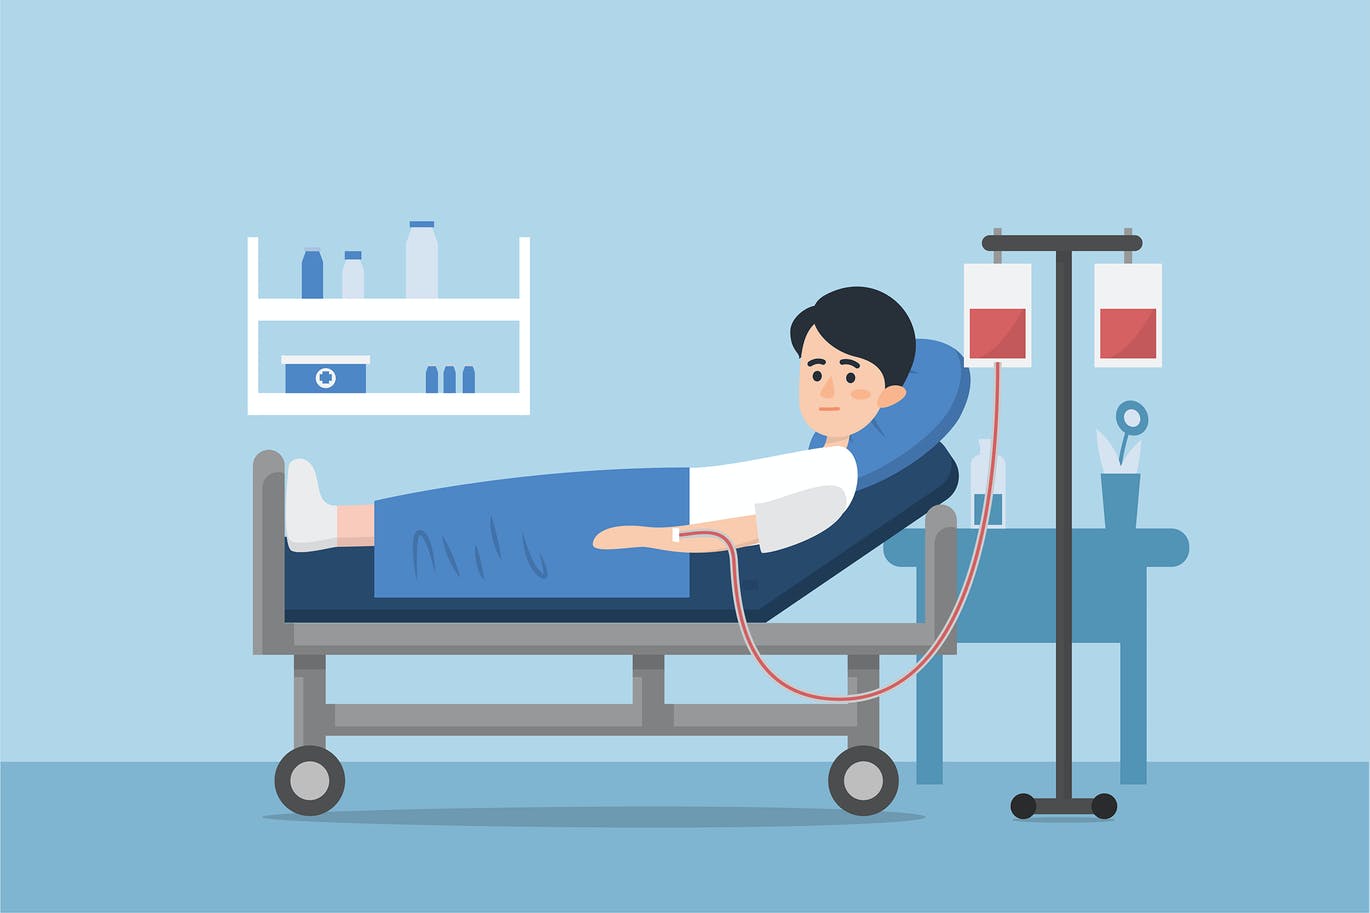 A sick person is in a medical bed on a drip